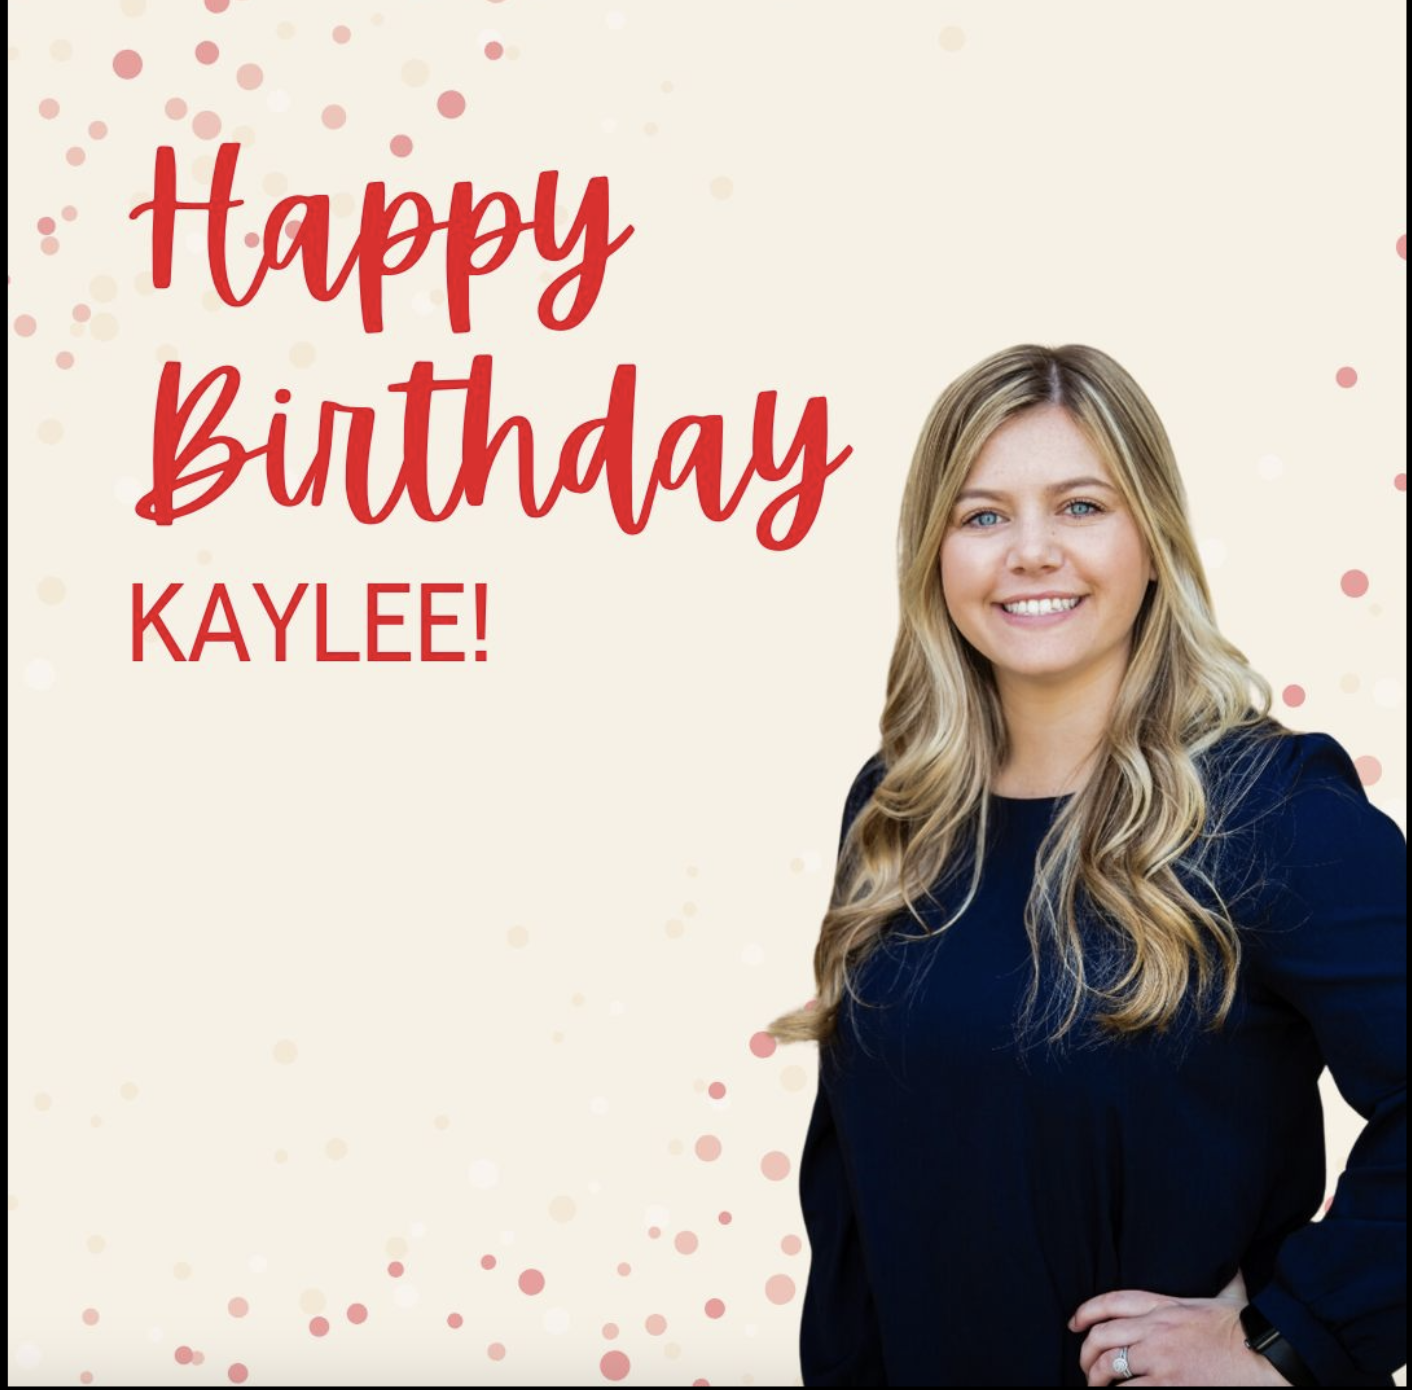 Happy Birthday, Kaylee! Wishing you a day filled with fun and special moments with your husband and daughter. Grateful to have you on our team – your dedication and hard work truly make a difference.